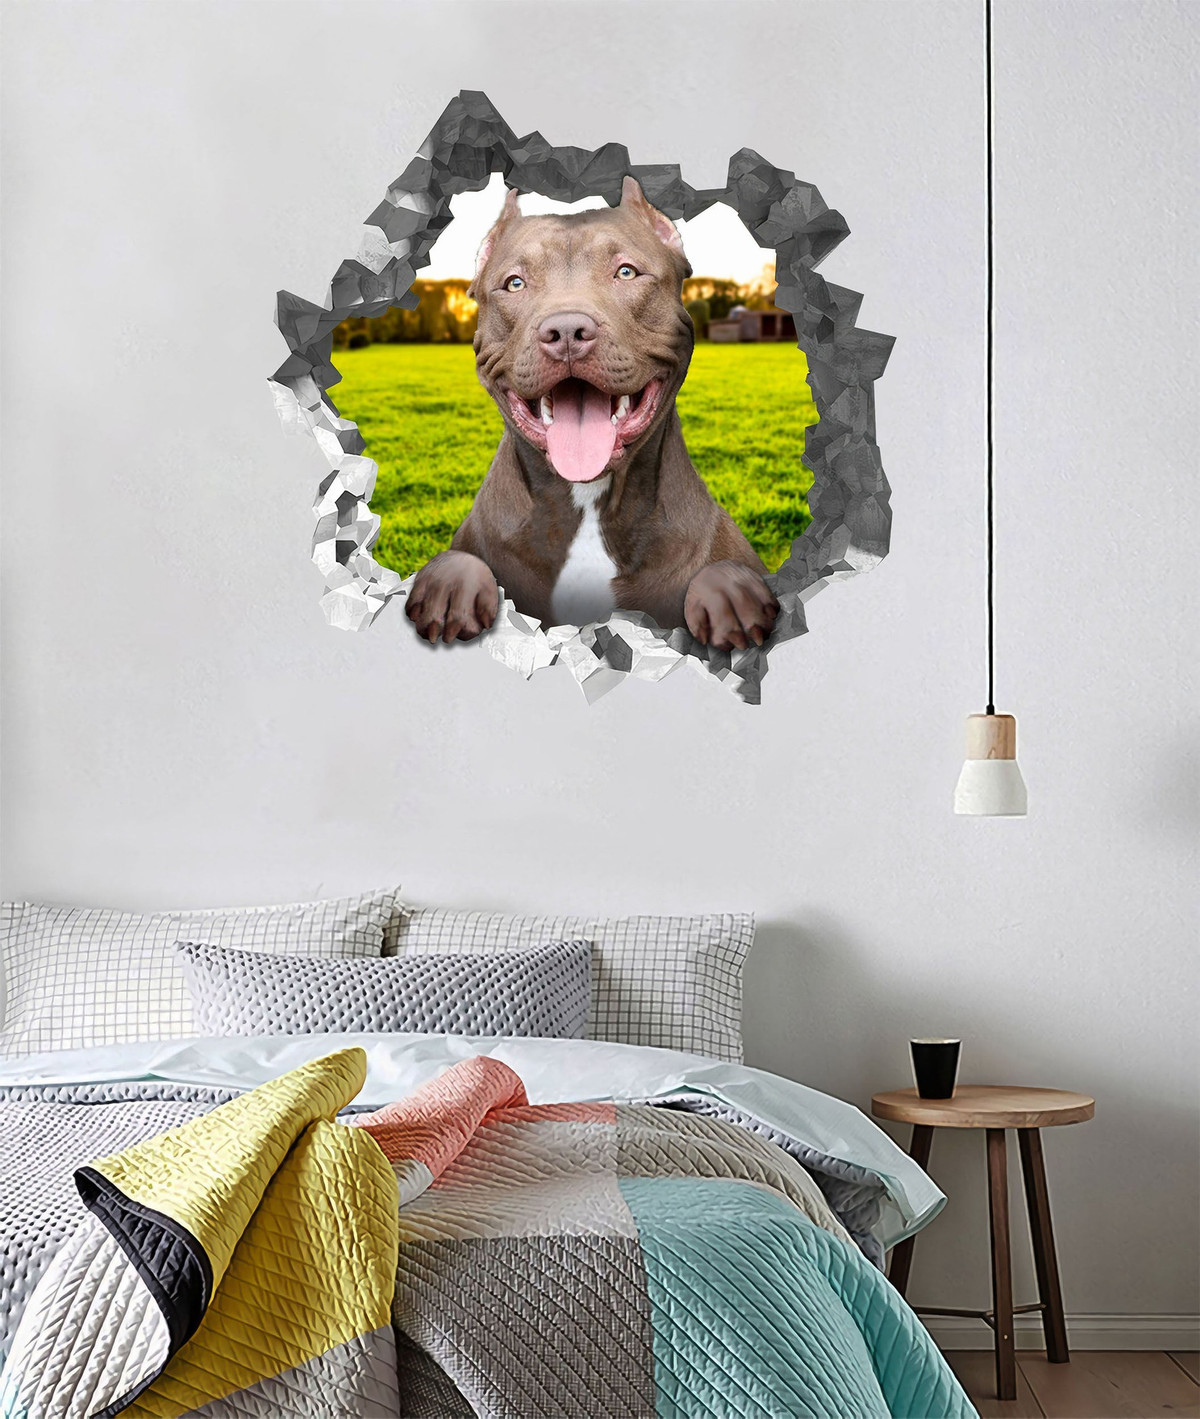 Pitbull Crack Wall Decal, Sprint Car Decals 16x24IN 1PC